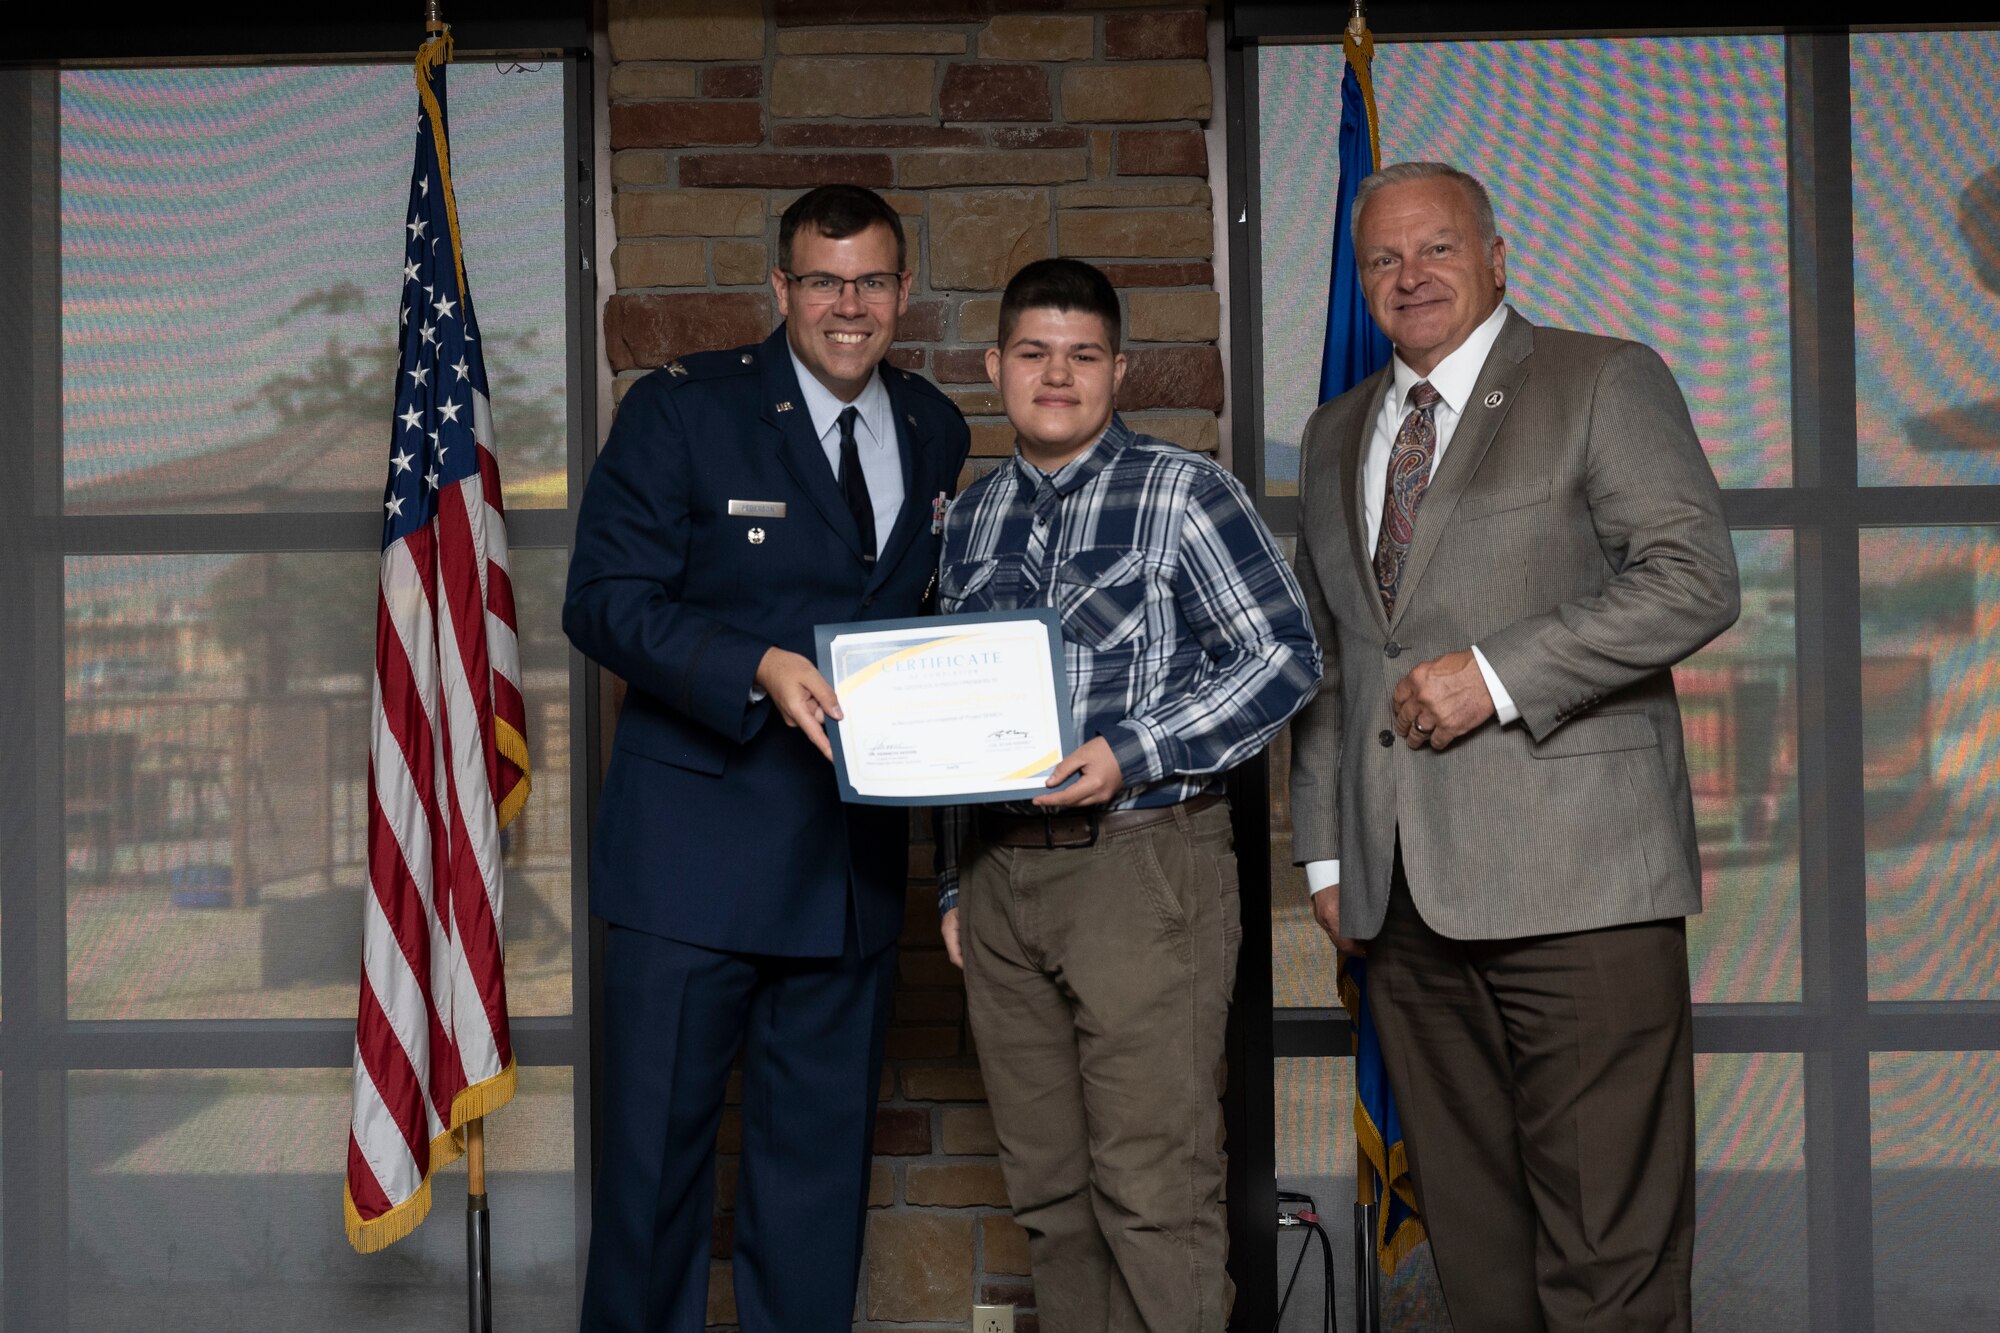 Devin Stevenson-Gutierrez, Project SEARCH intern, receives graduation certificate, May 24, 2022, on Holloman Air Force Base, New Mexico.